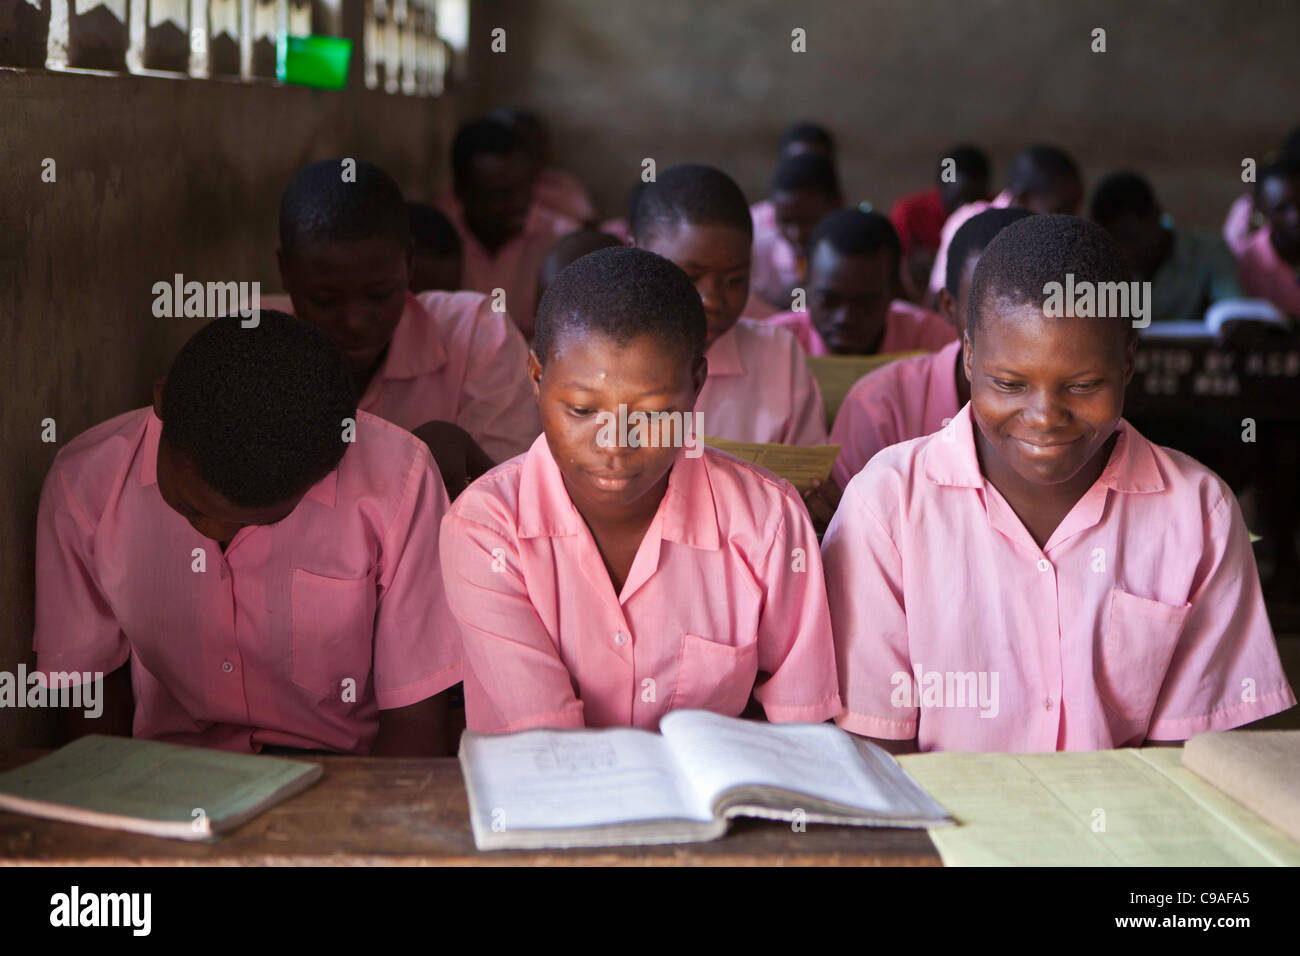 School class in Mombasa, Kenya. The school is supported by Wema, a NGO organisation supporting vulnerable children. Stock Photo